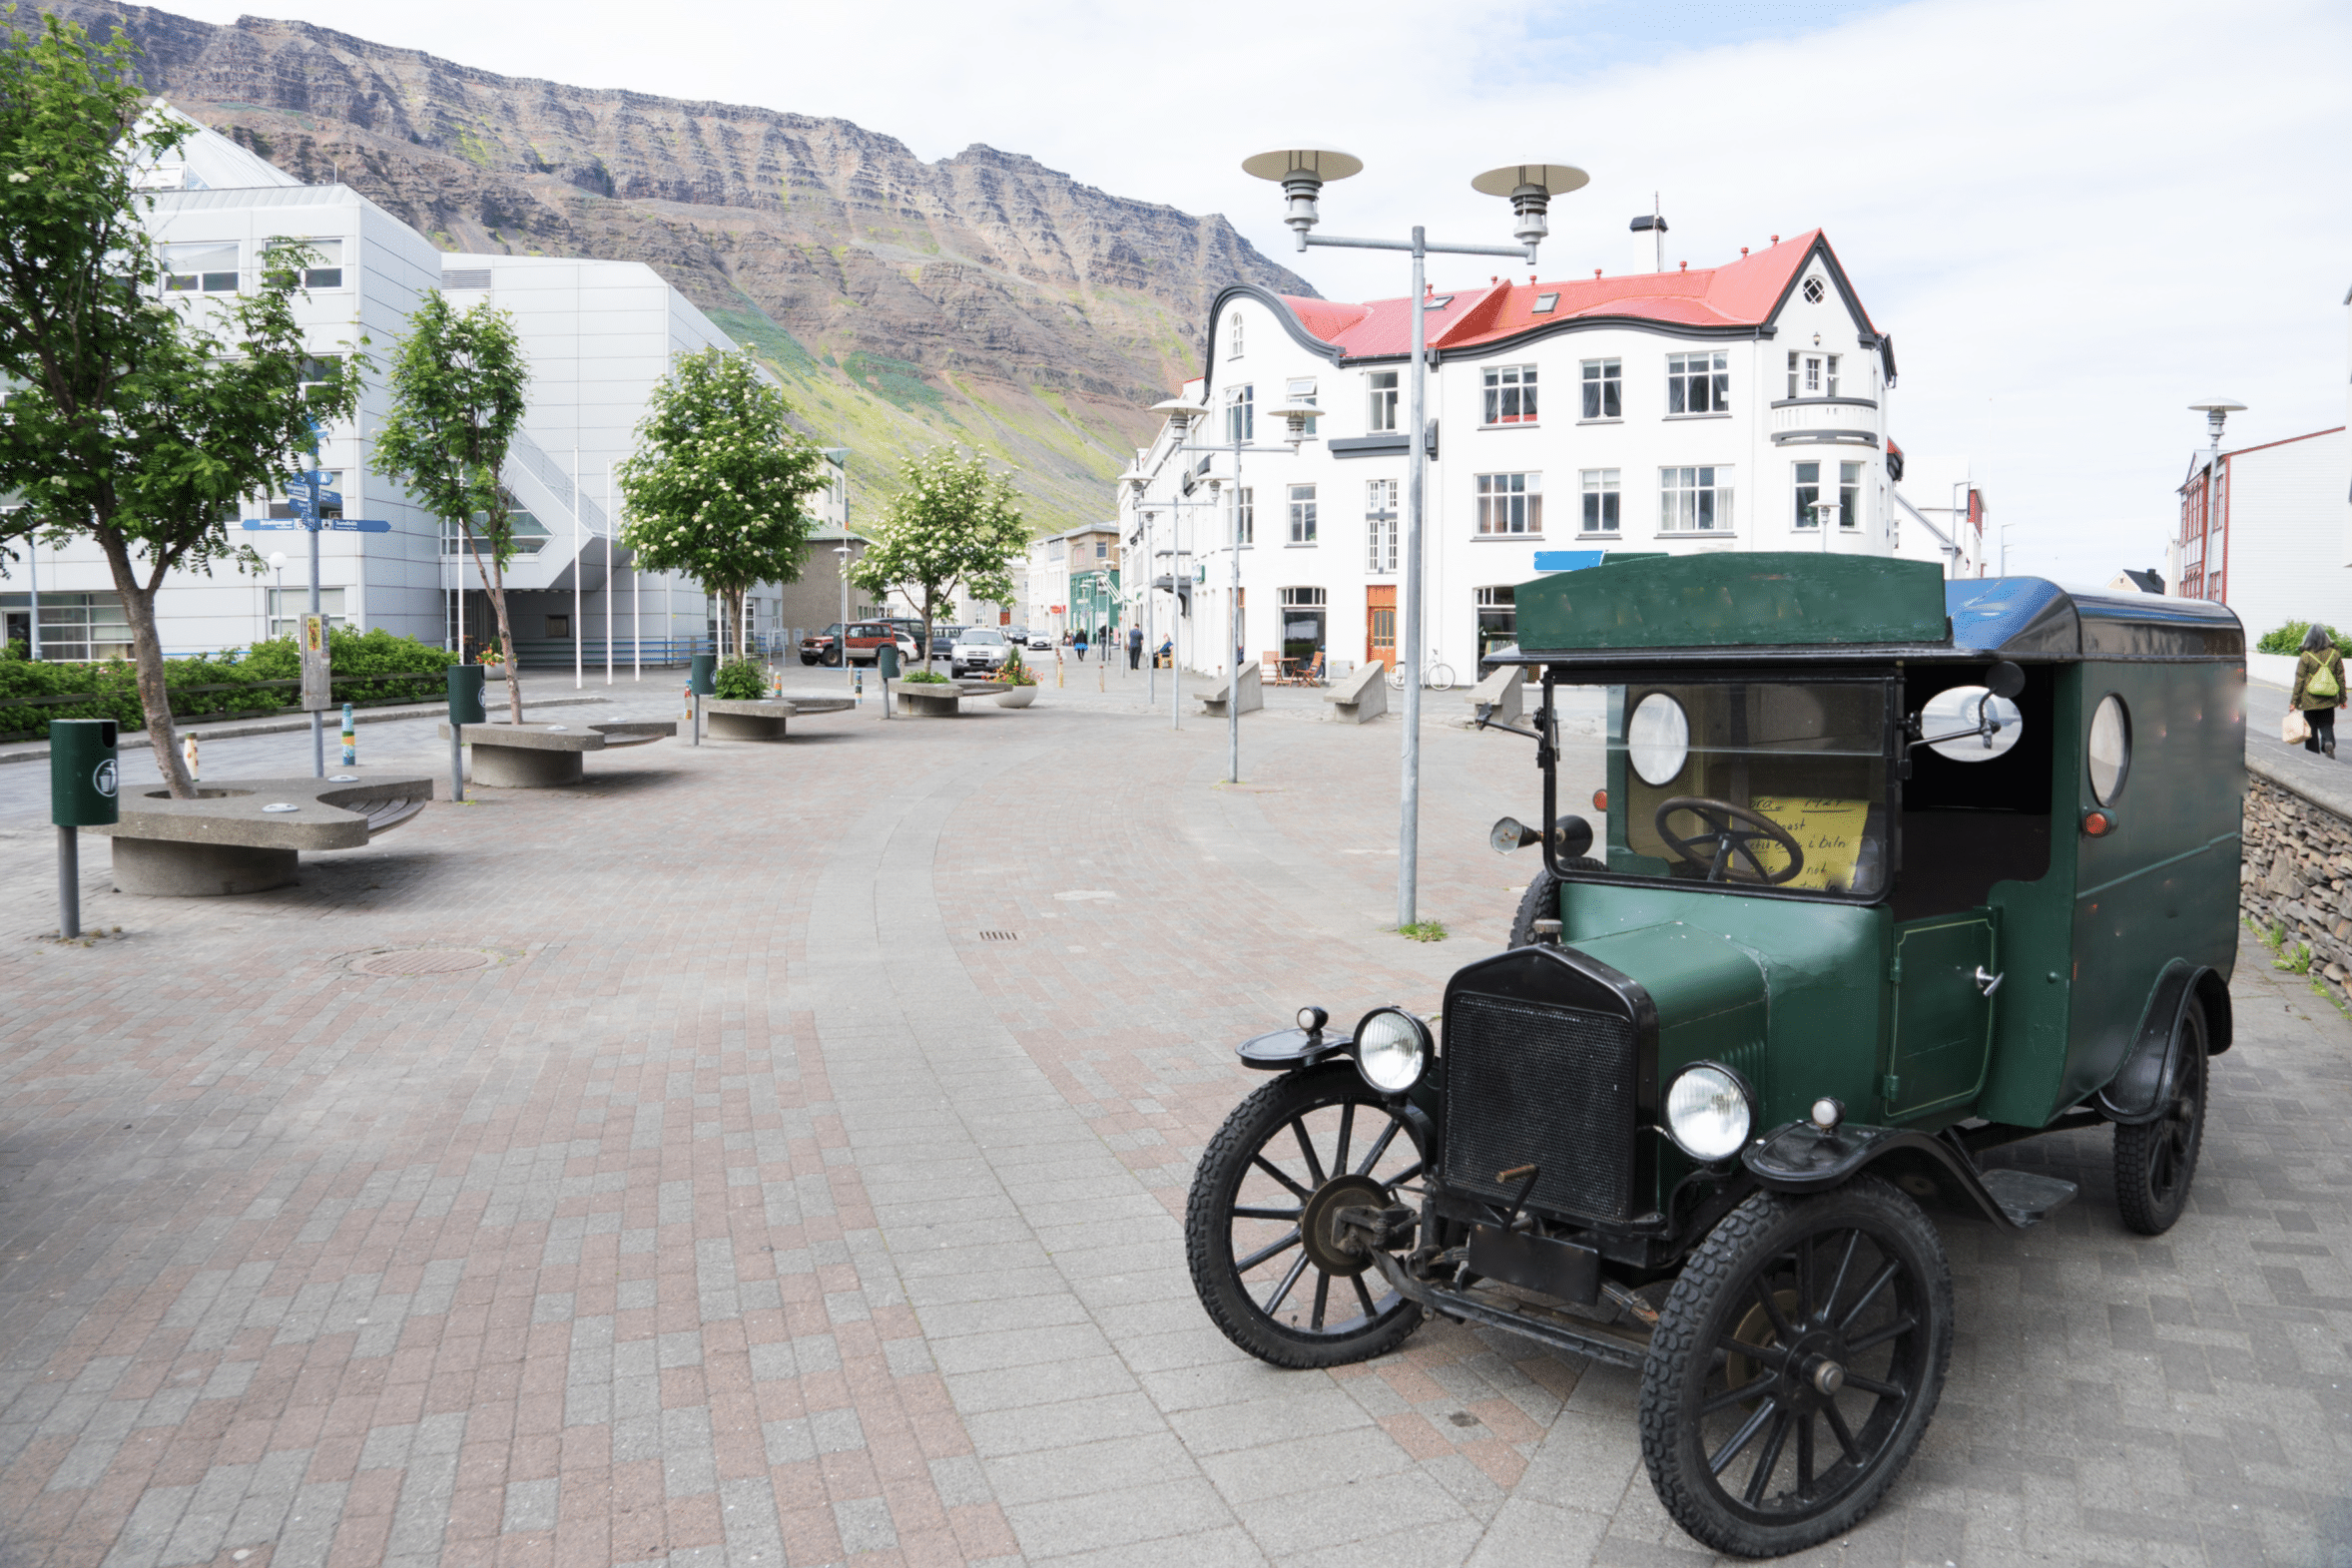 An old car on a quiet street in Isafjordur Town in the Westfjords of Iceland